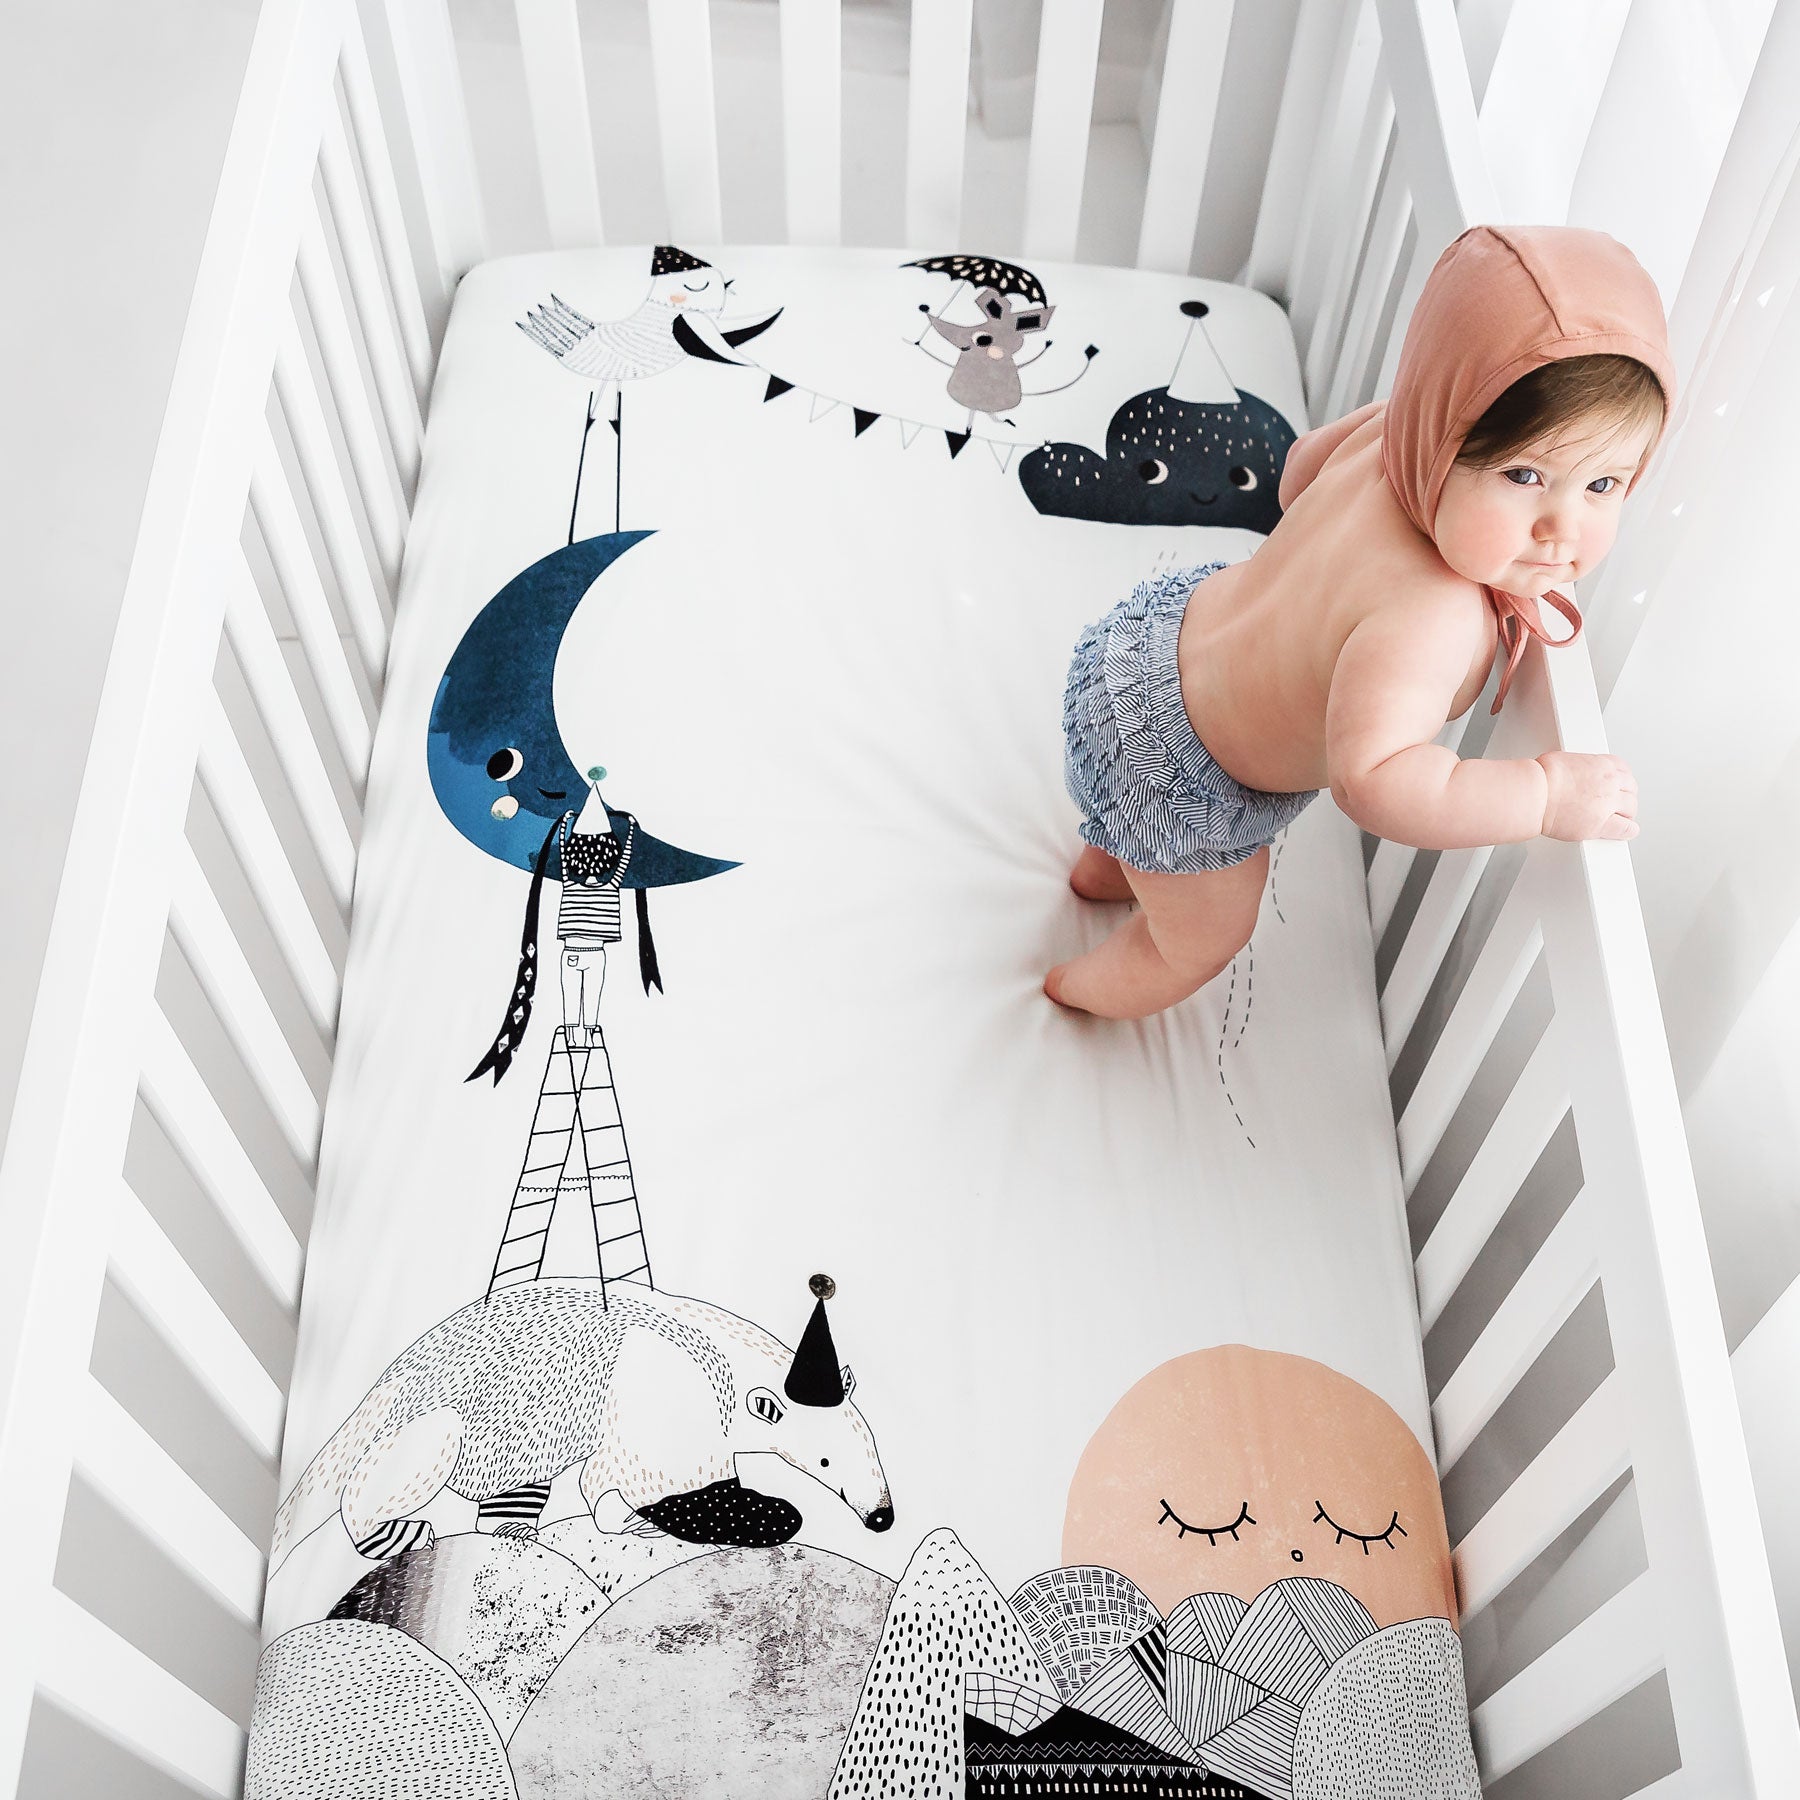 Fitted baby crib sheet by Rookie Humans, The Moon's Birthday. Illustrated by Swanjte Hinrichsen. Designed for the modern nursery, packages to make a unique baby shower gift.